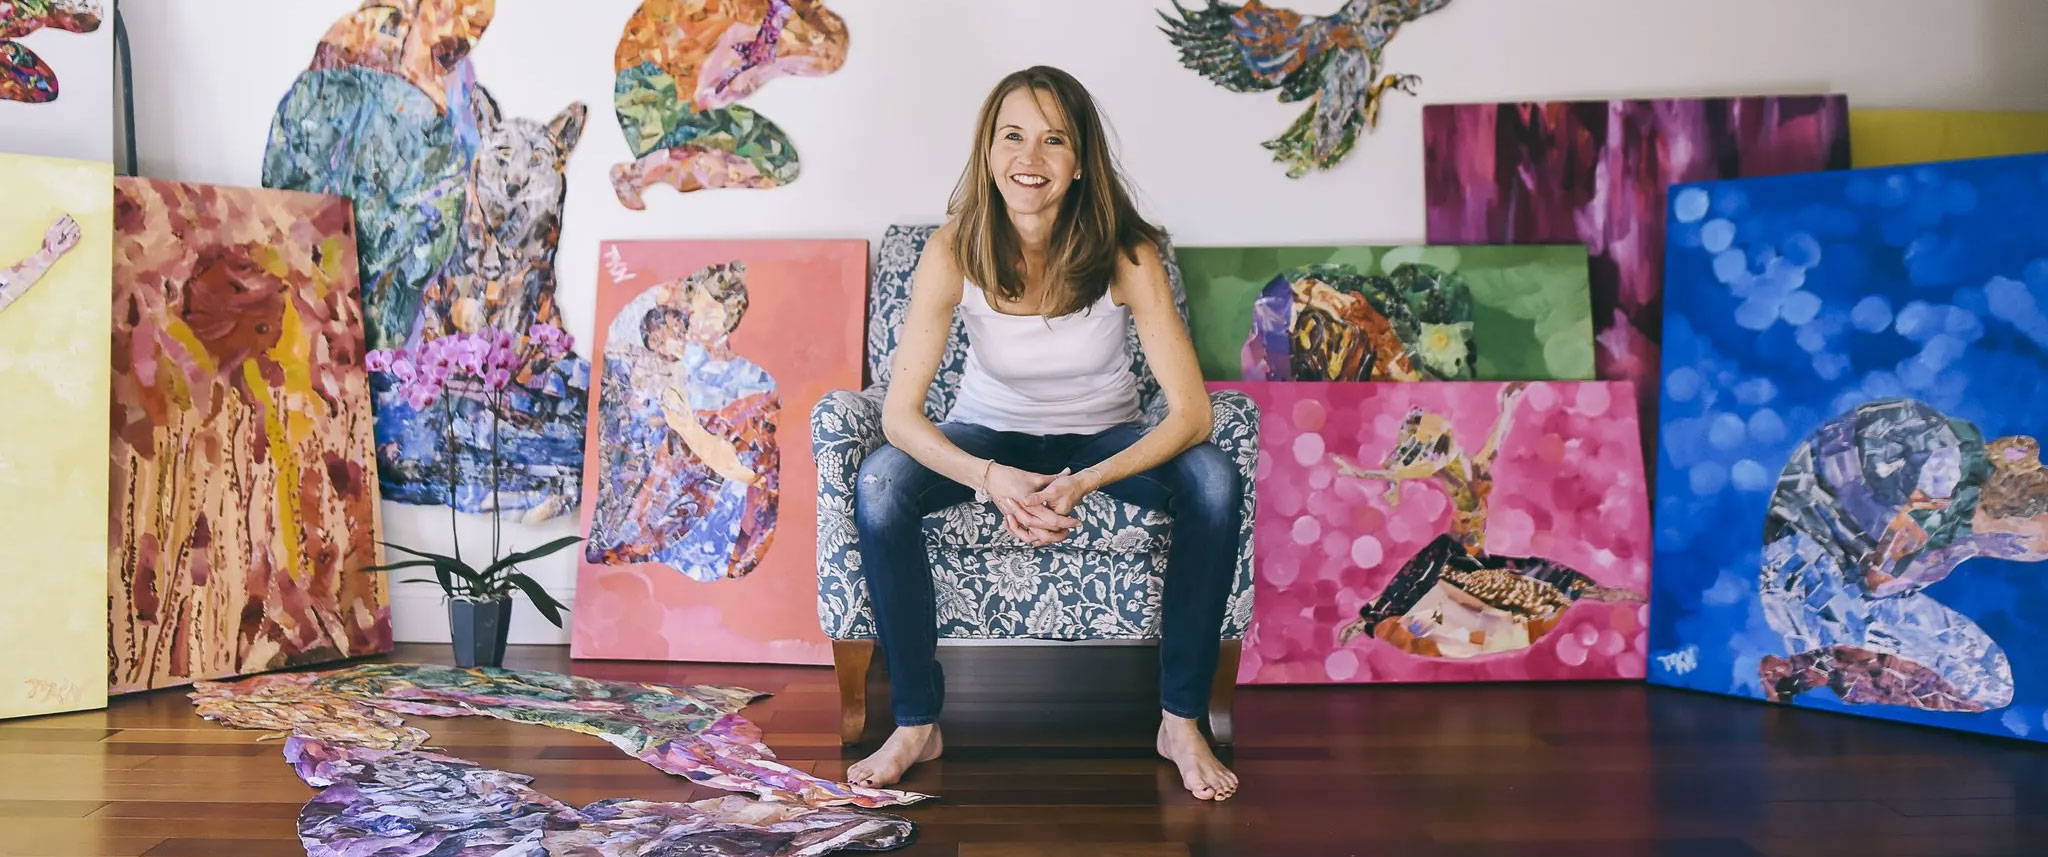 Meghan Nathanson sitting with collage art